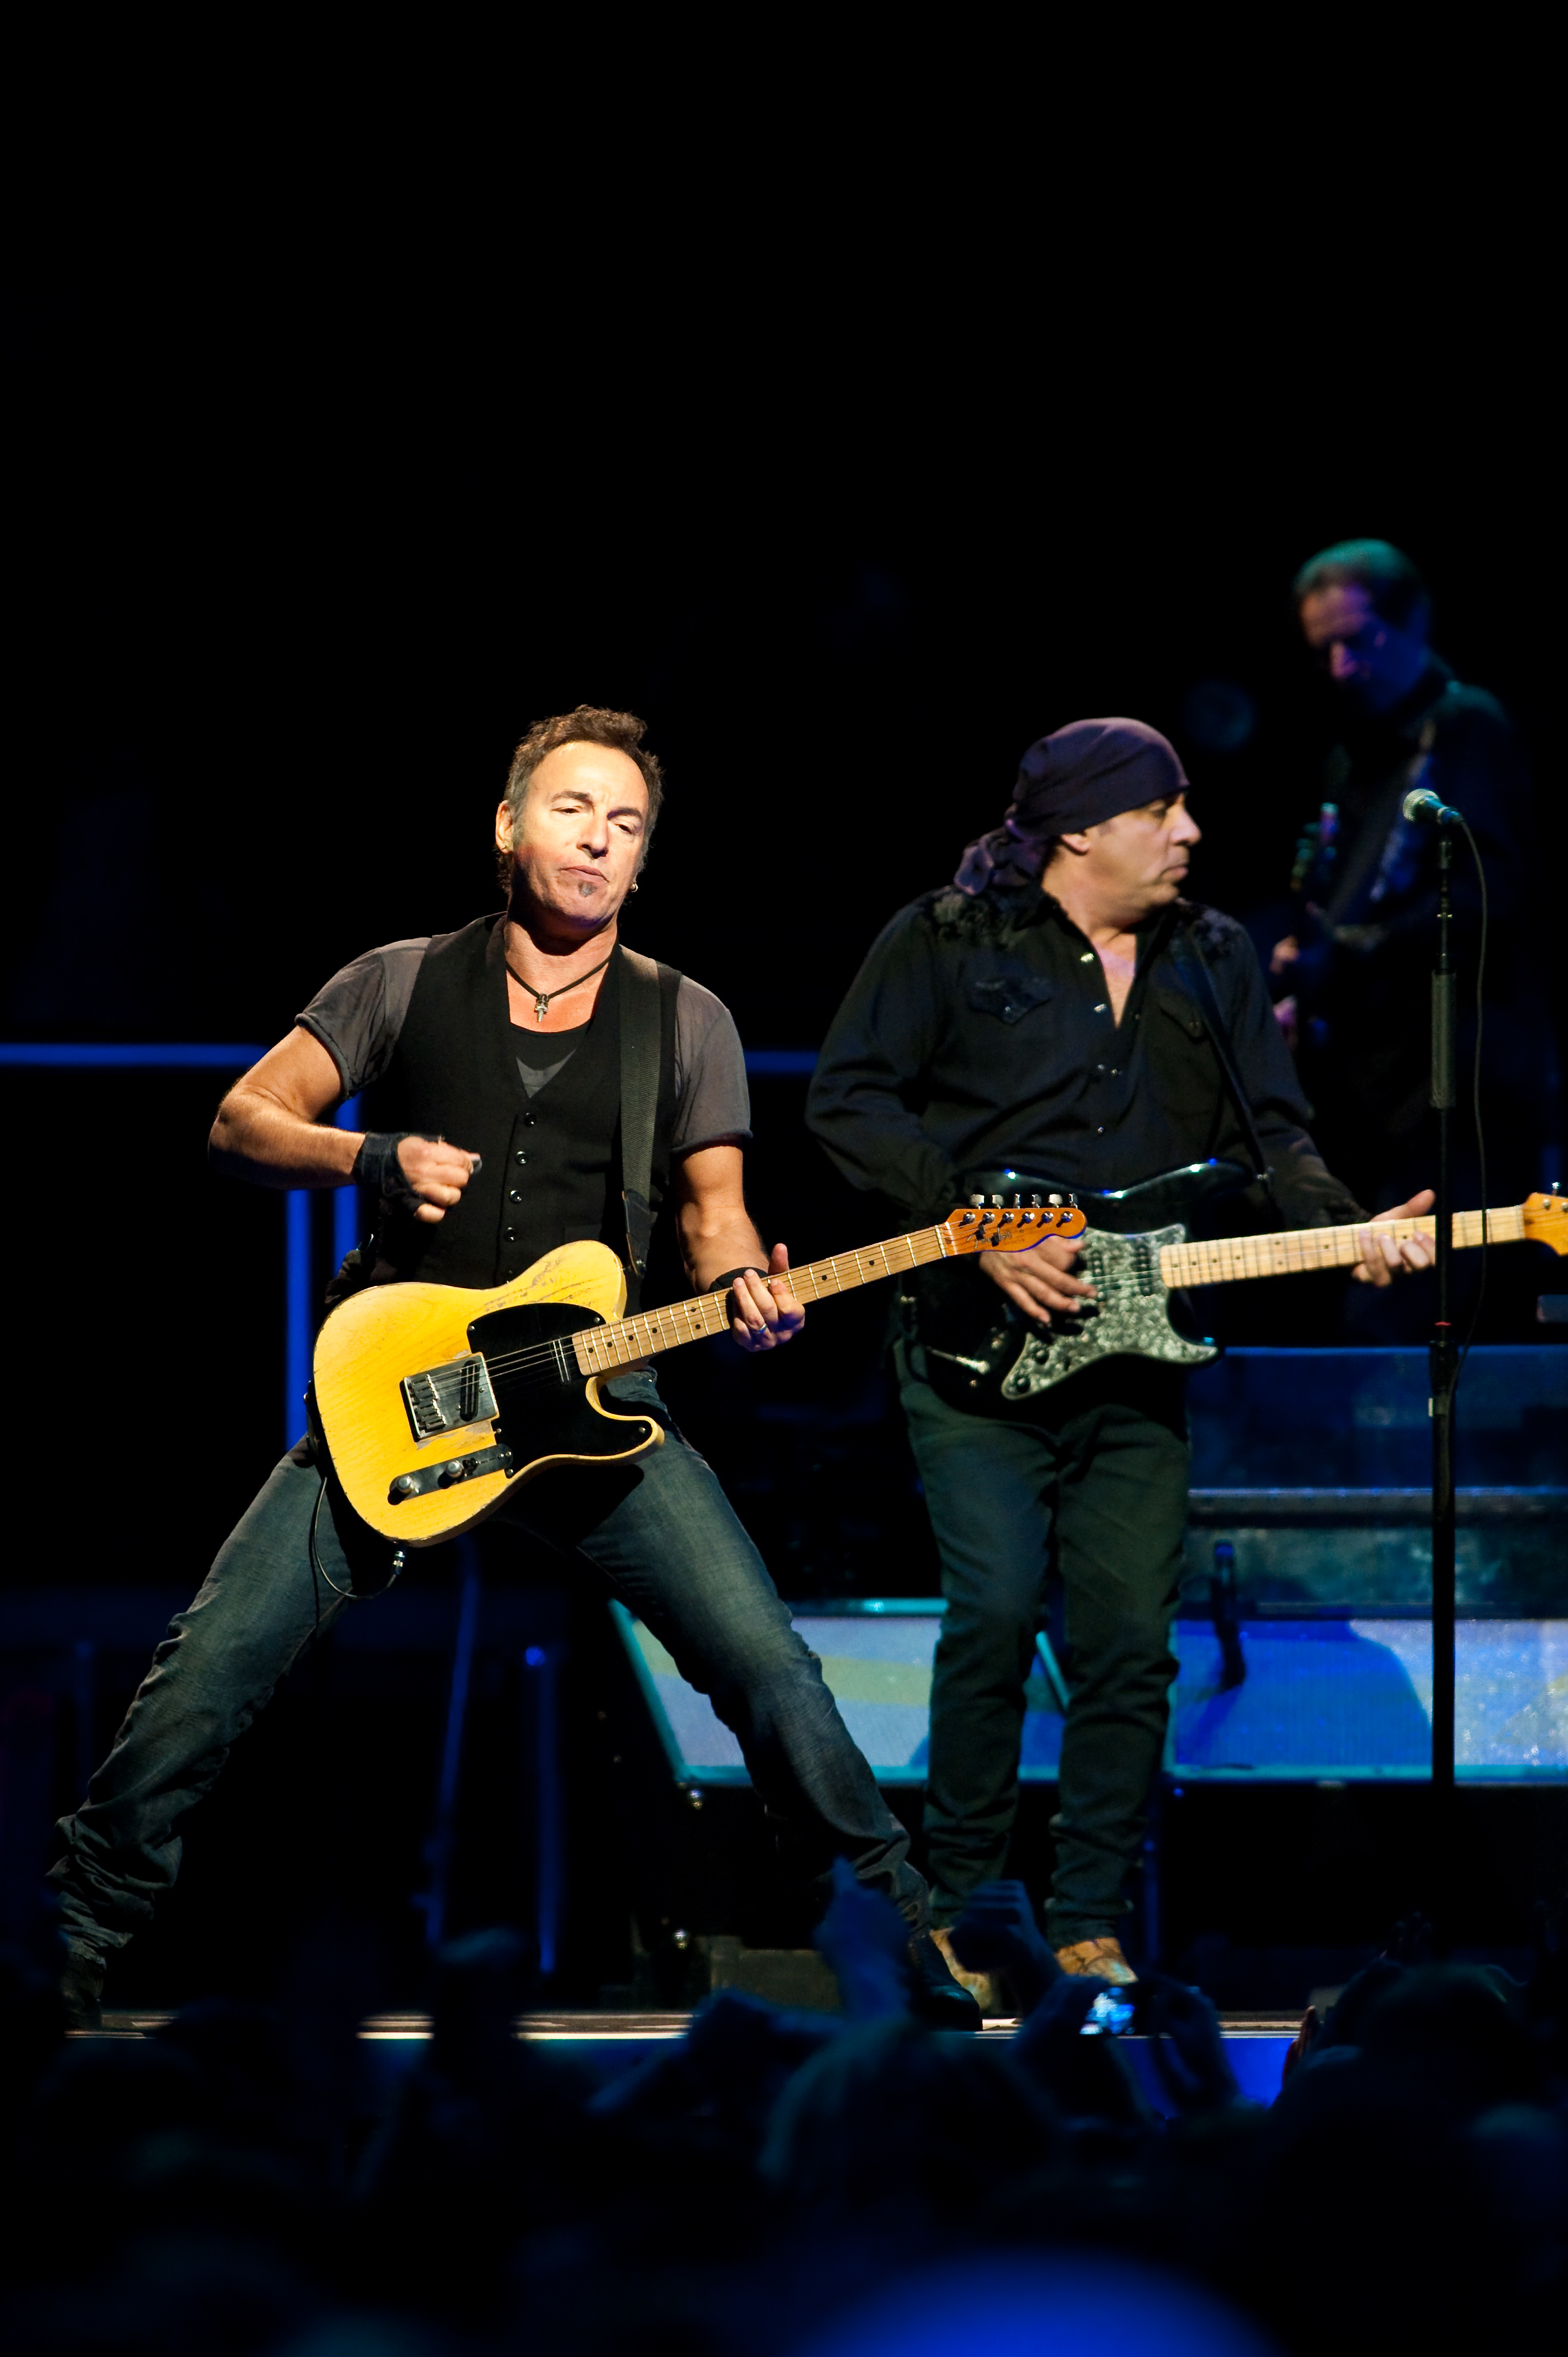 springsteen working on a dream tour